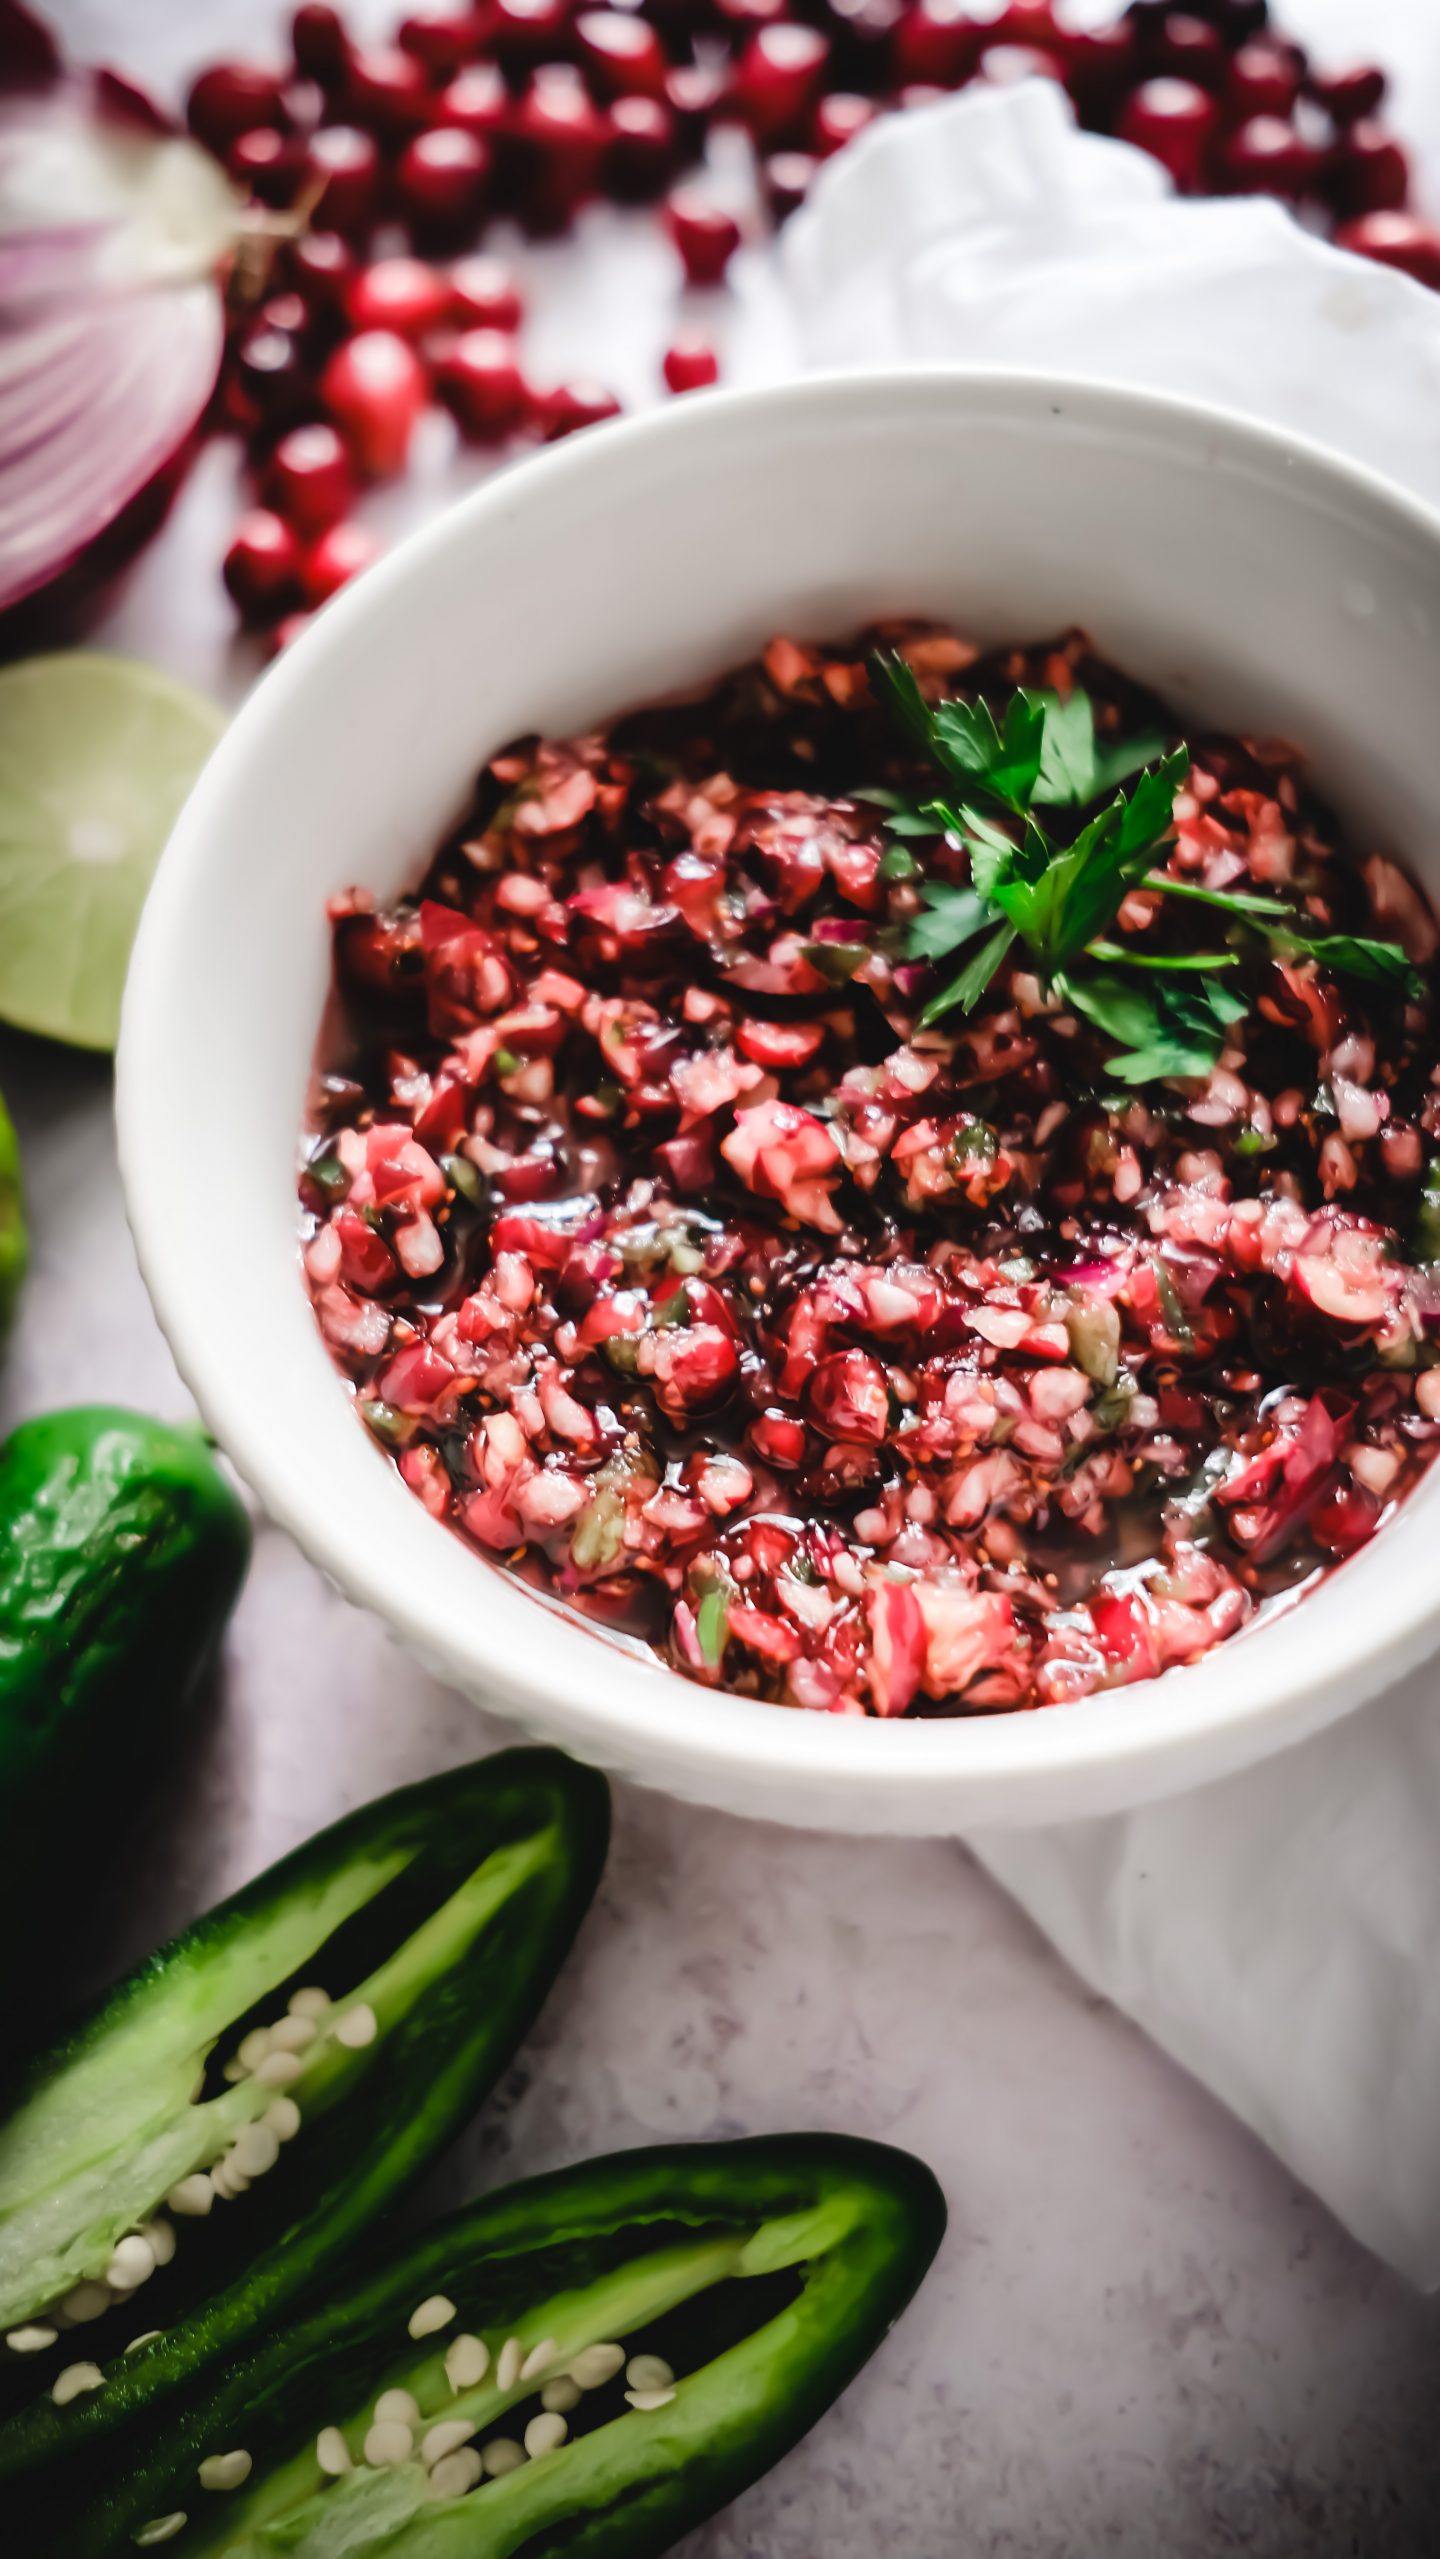 Lifestyle Blogger Chocolate and Lace shares her recipe for Sweet and Spicy Cranberry Jalepeno Salsa